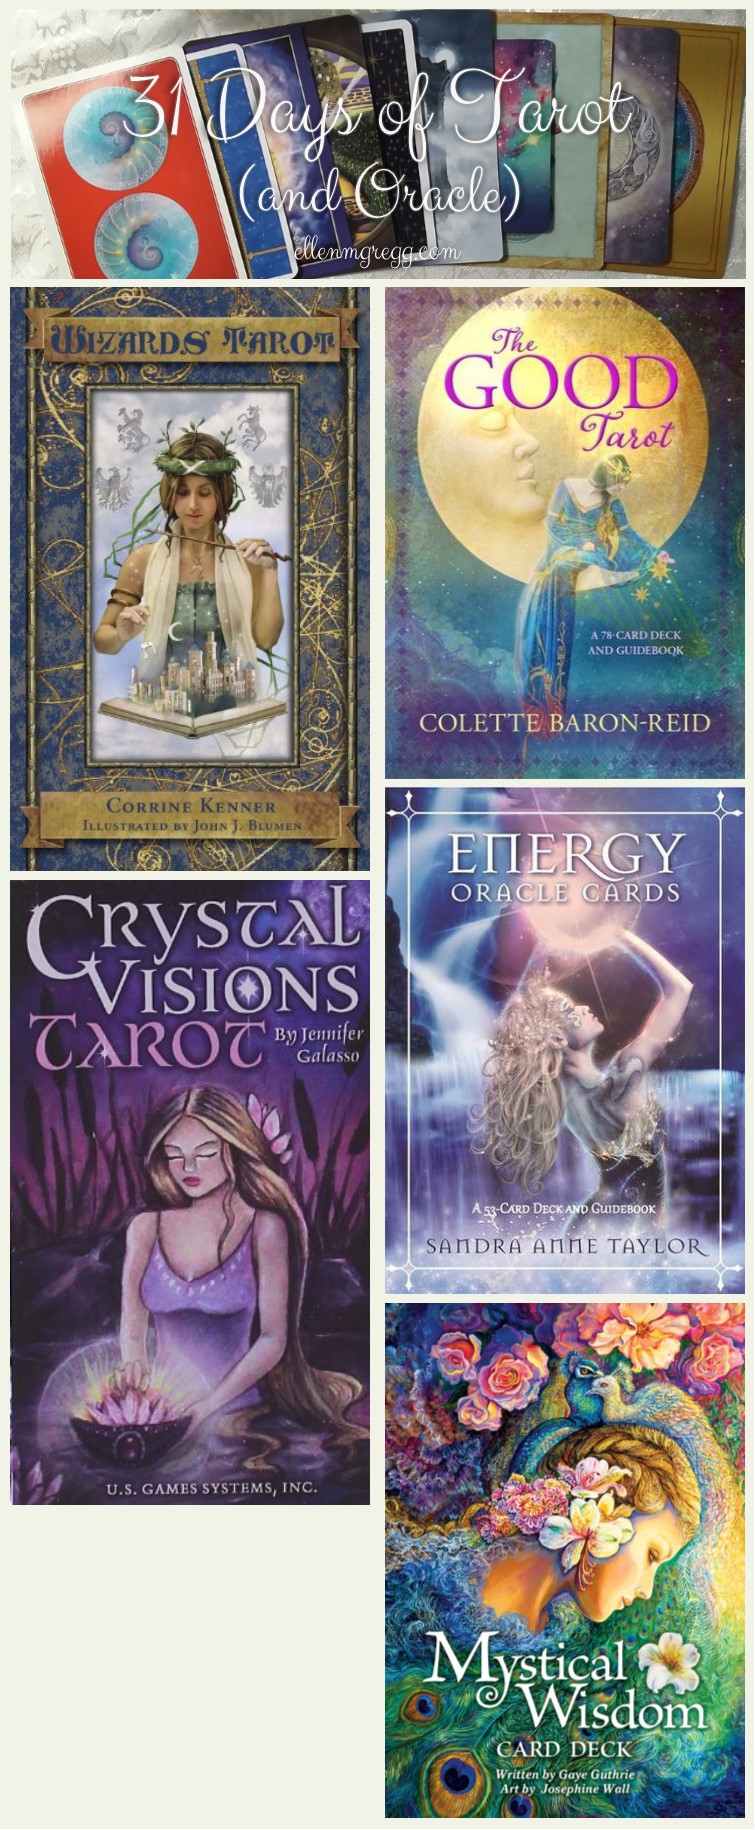 31 Days of Tarot, Day 9: The top 5 decks on my wish list are: Wizards Tarot, The Good Tarot, Crystal Visions Tarot, Energy Oracle Cards and Mystical Wisdom Card Deck